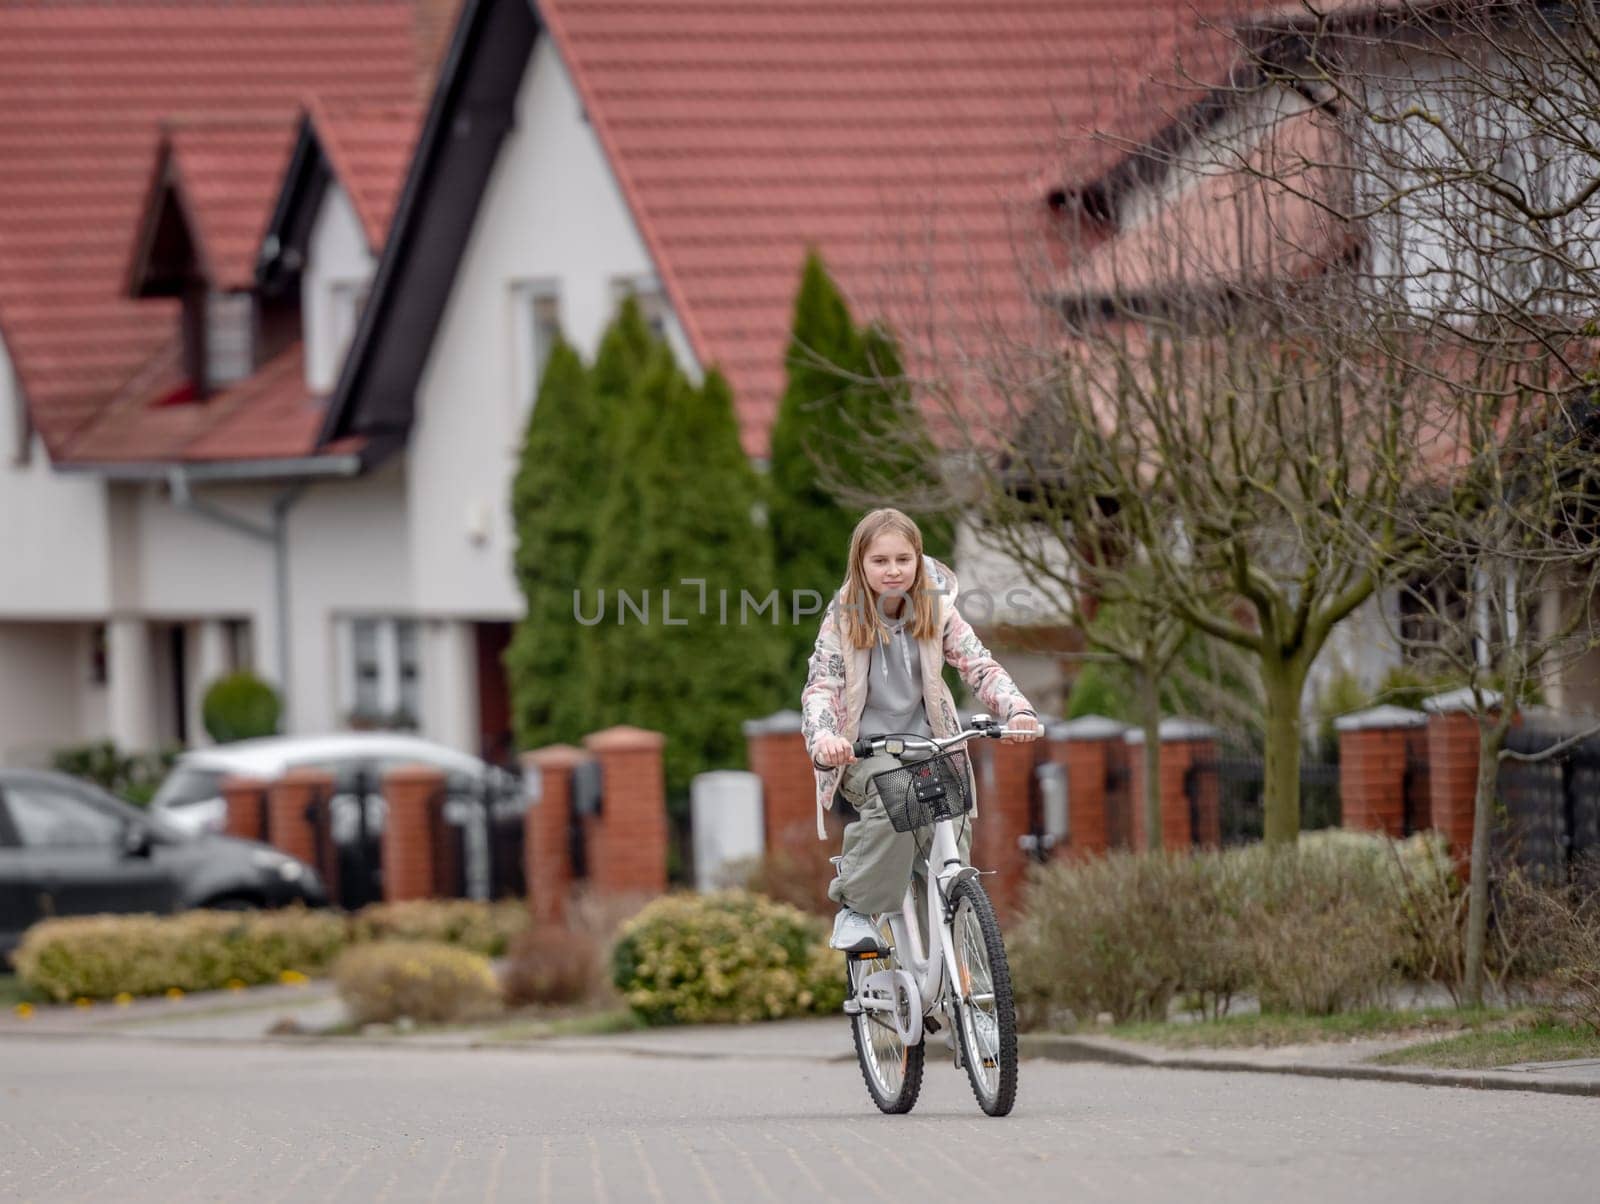 Girl Rides Bike Among Private Homes In Europe by tan4ikk1